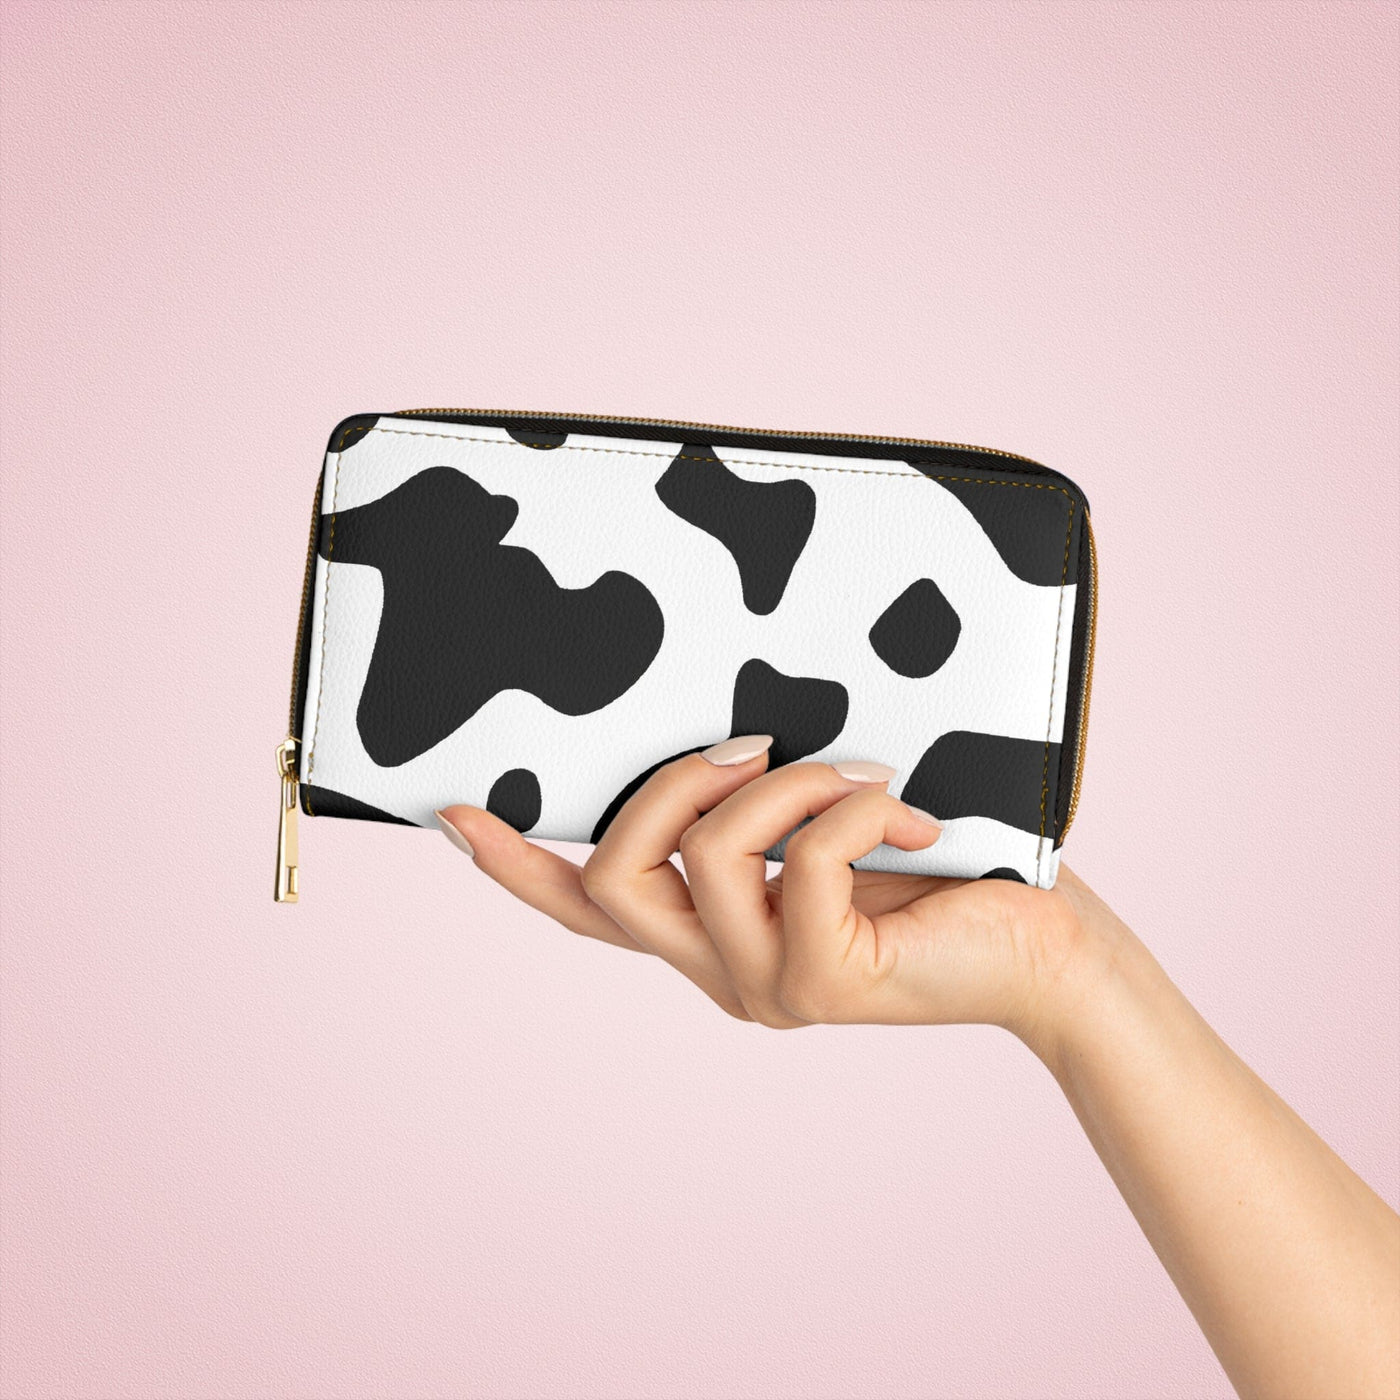 Black And White Abstract Cow Print Pattern Womens Zipper Wallet Clutch Purse